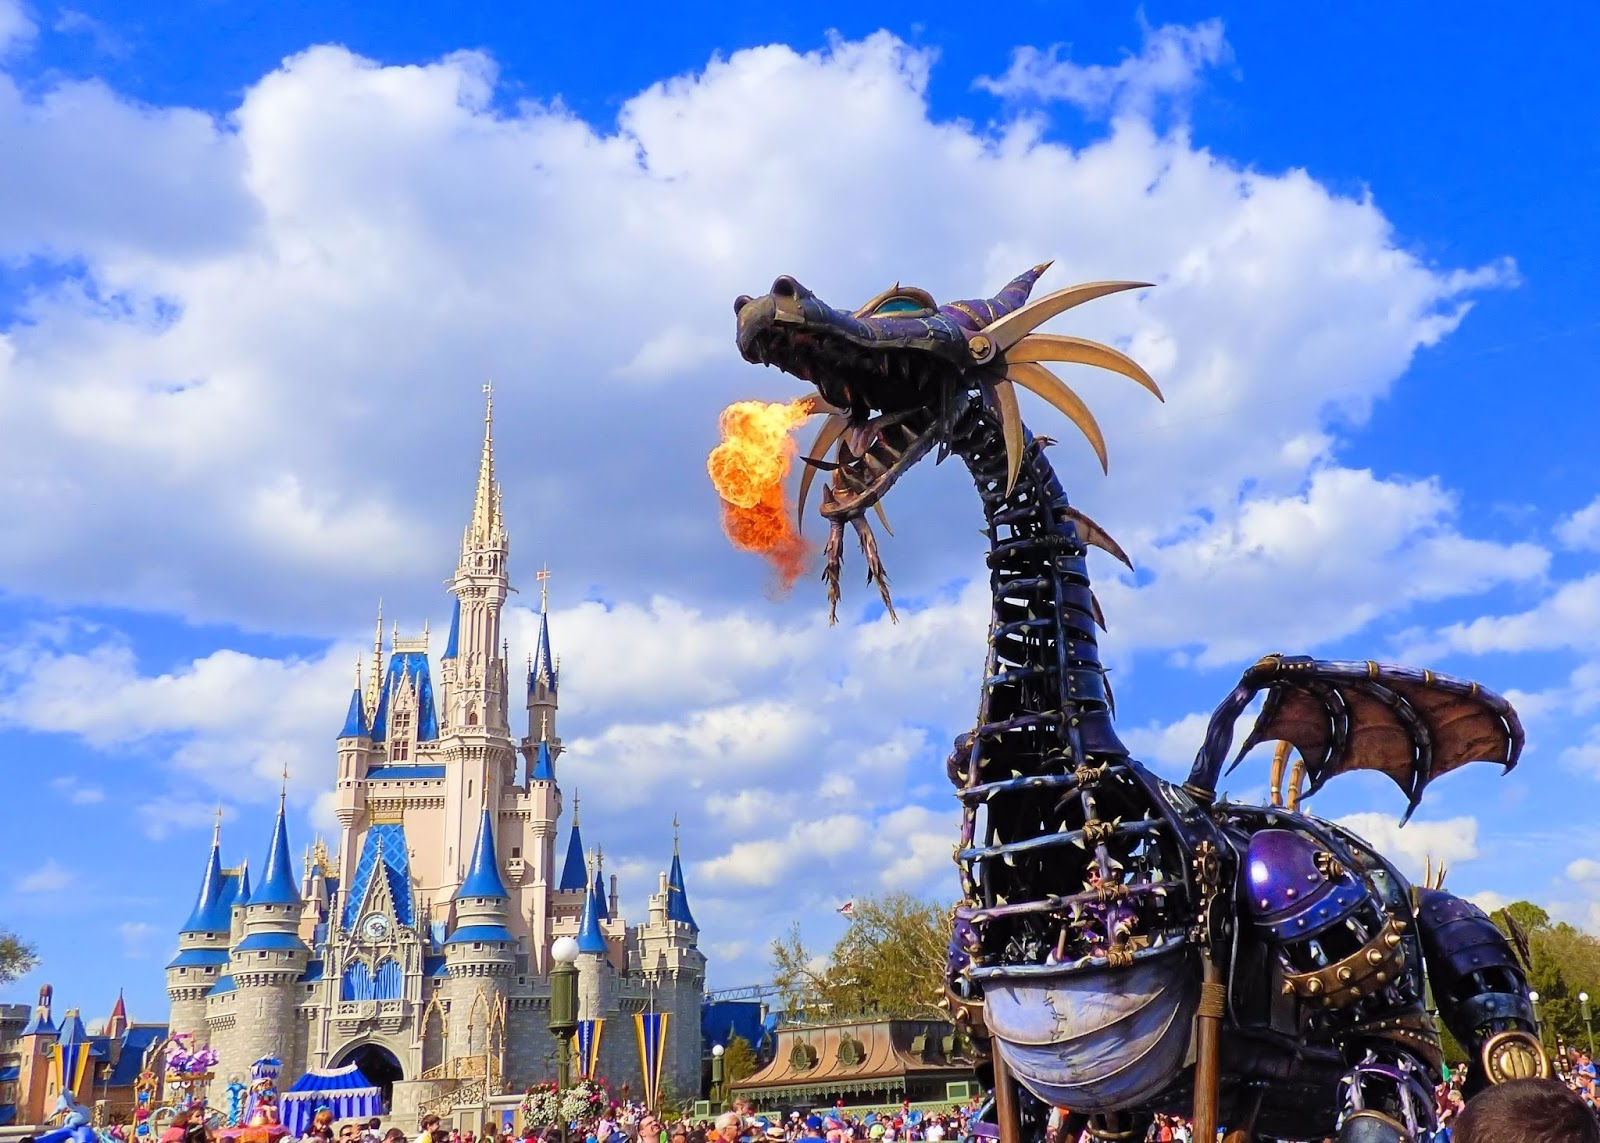 Disney Avenue: 4 Reasons the “Festival of Fantasy” Parade is a "Must See"